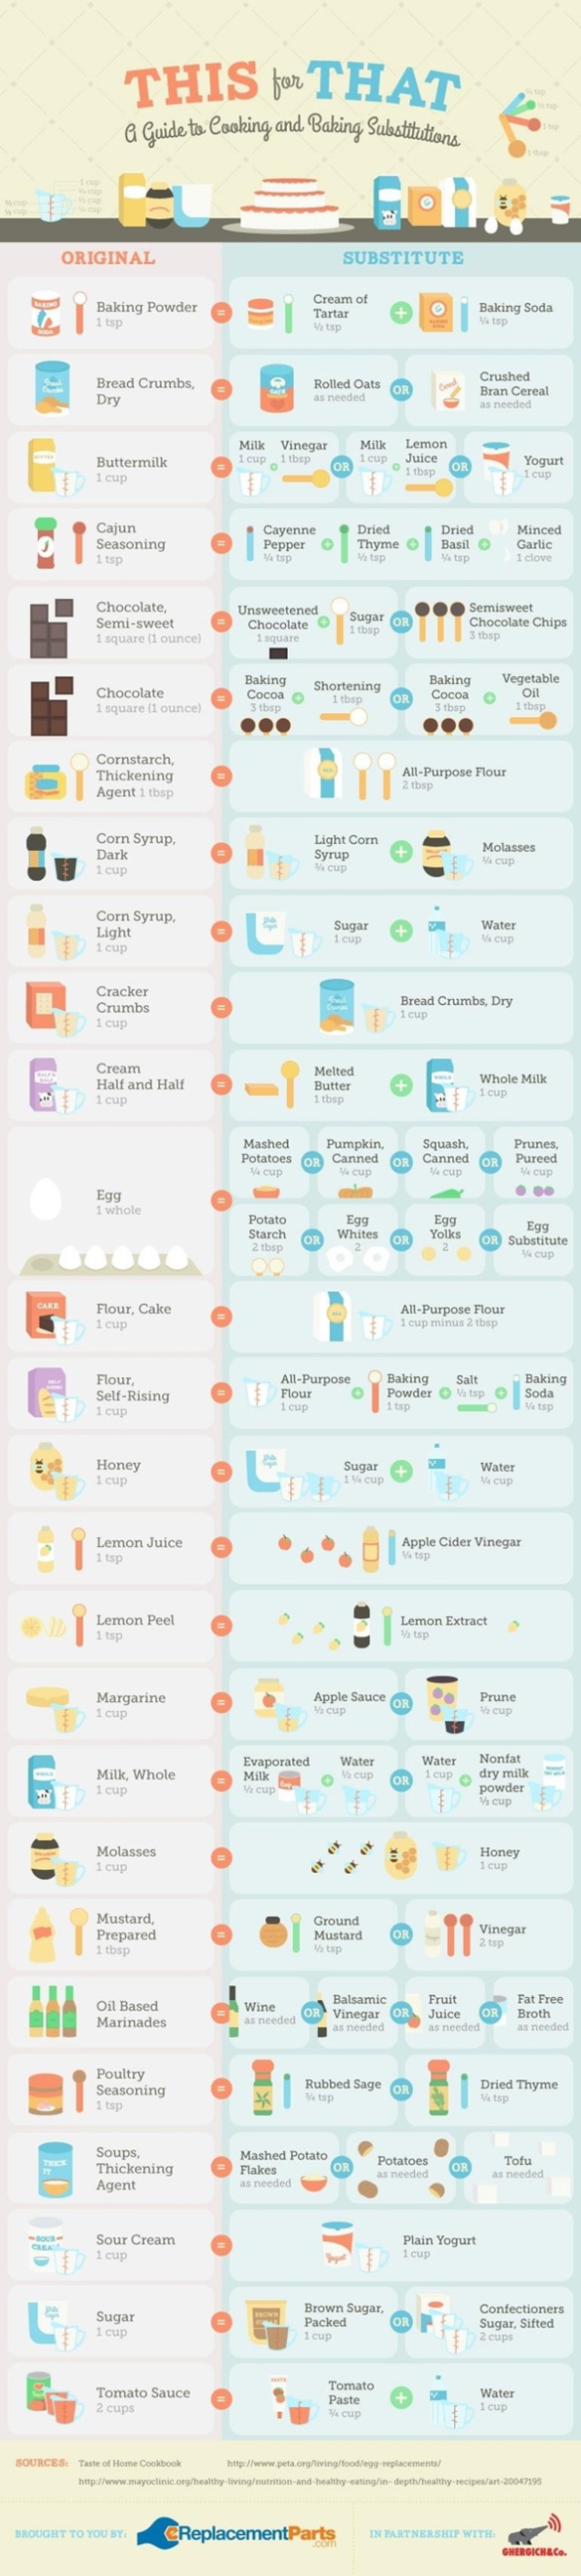 This for That: A Guide to Cooking and Baking Substitutions infographic